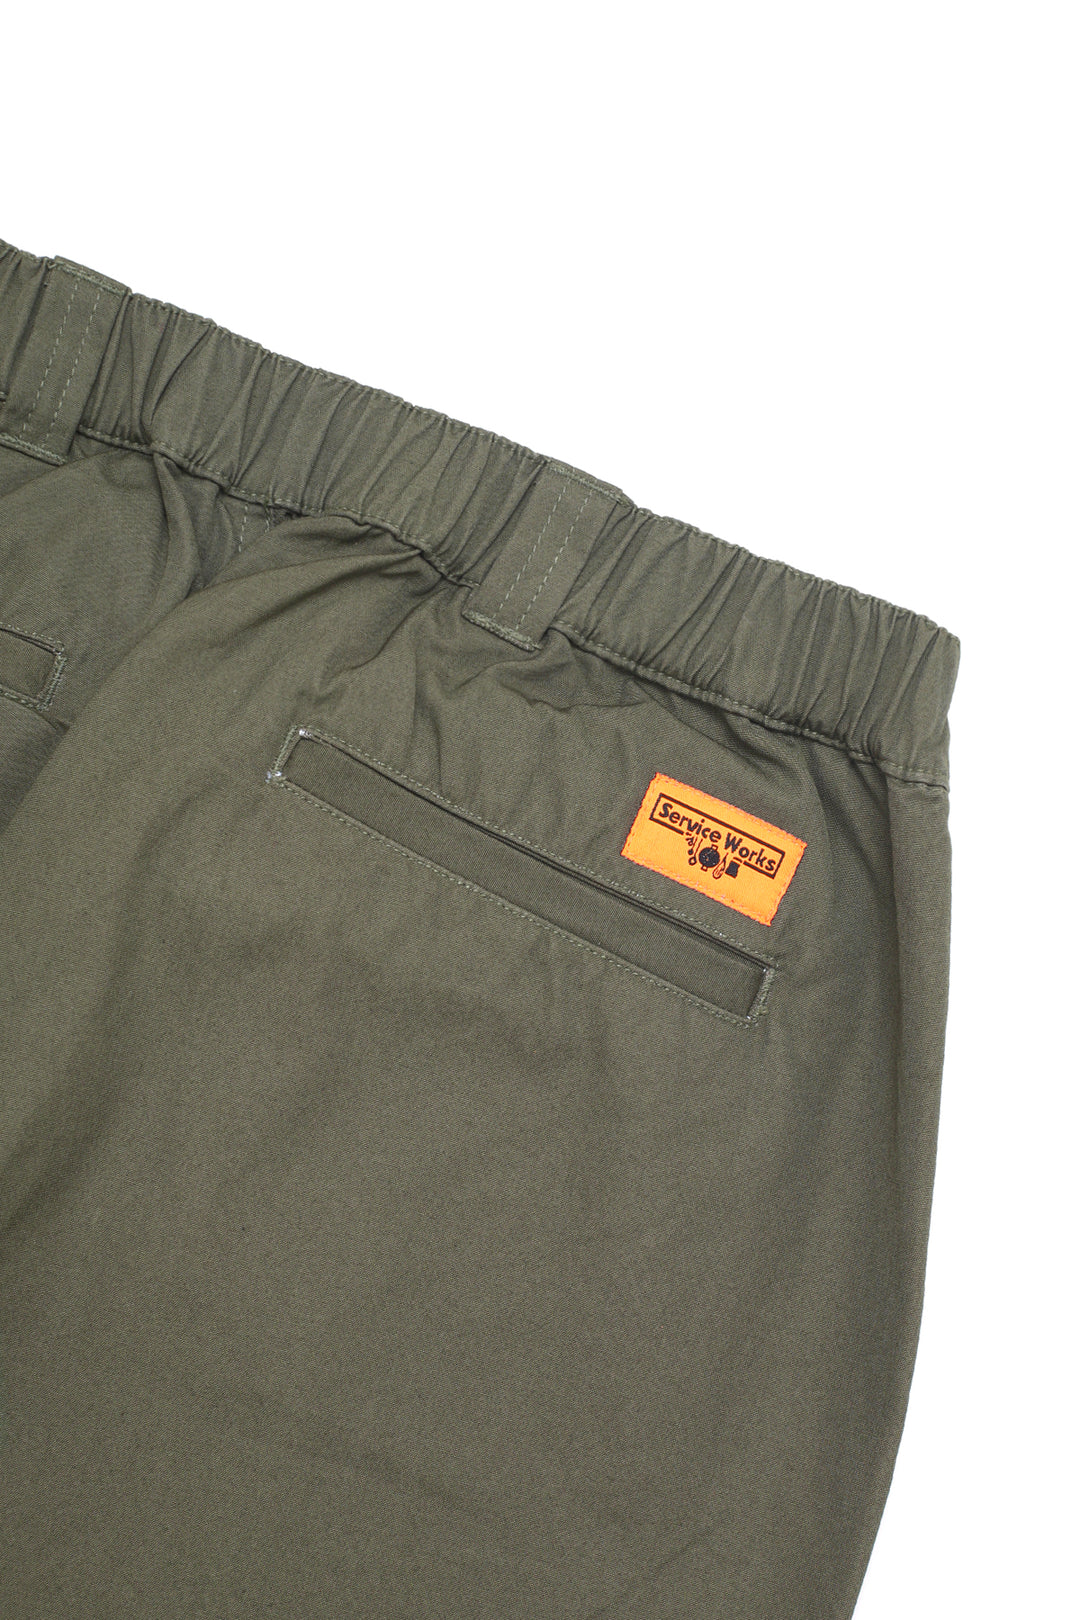 Service Works - Twill Waiters Pant - Olive